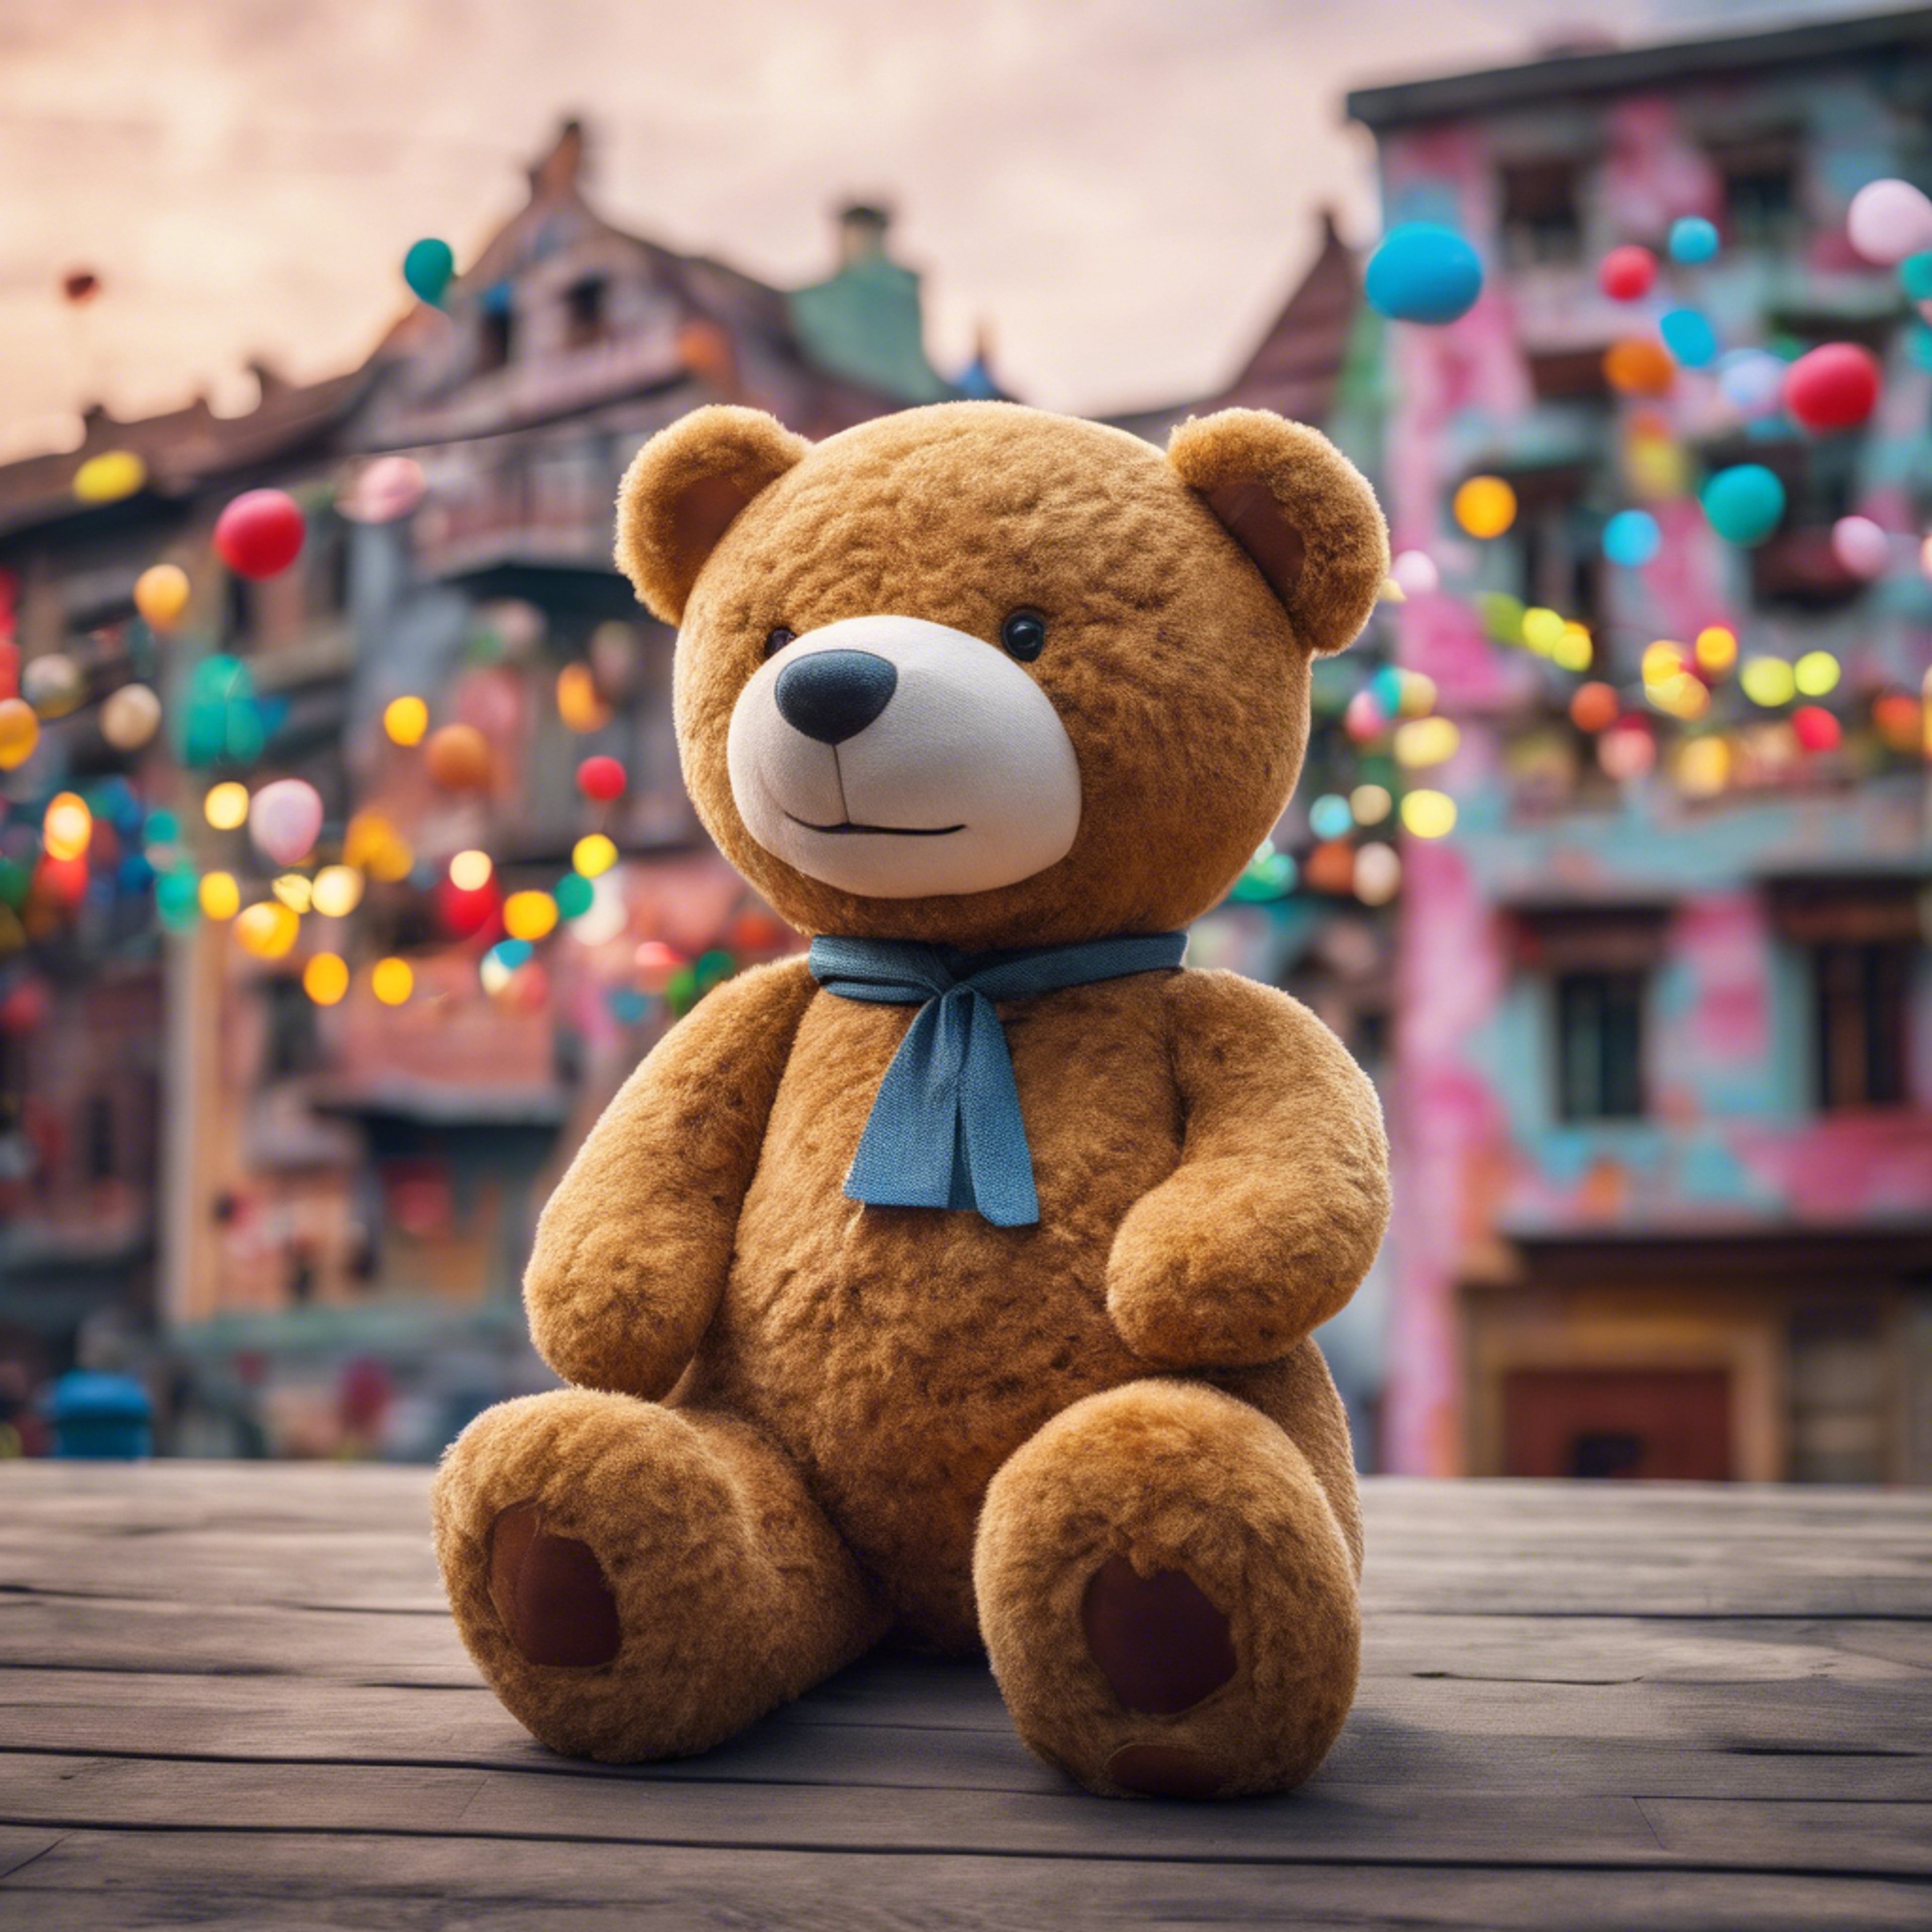 A giant teddy bear watching over a playful and colorful dream town.壁紙[2720b550e885450daa82]